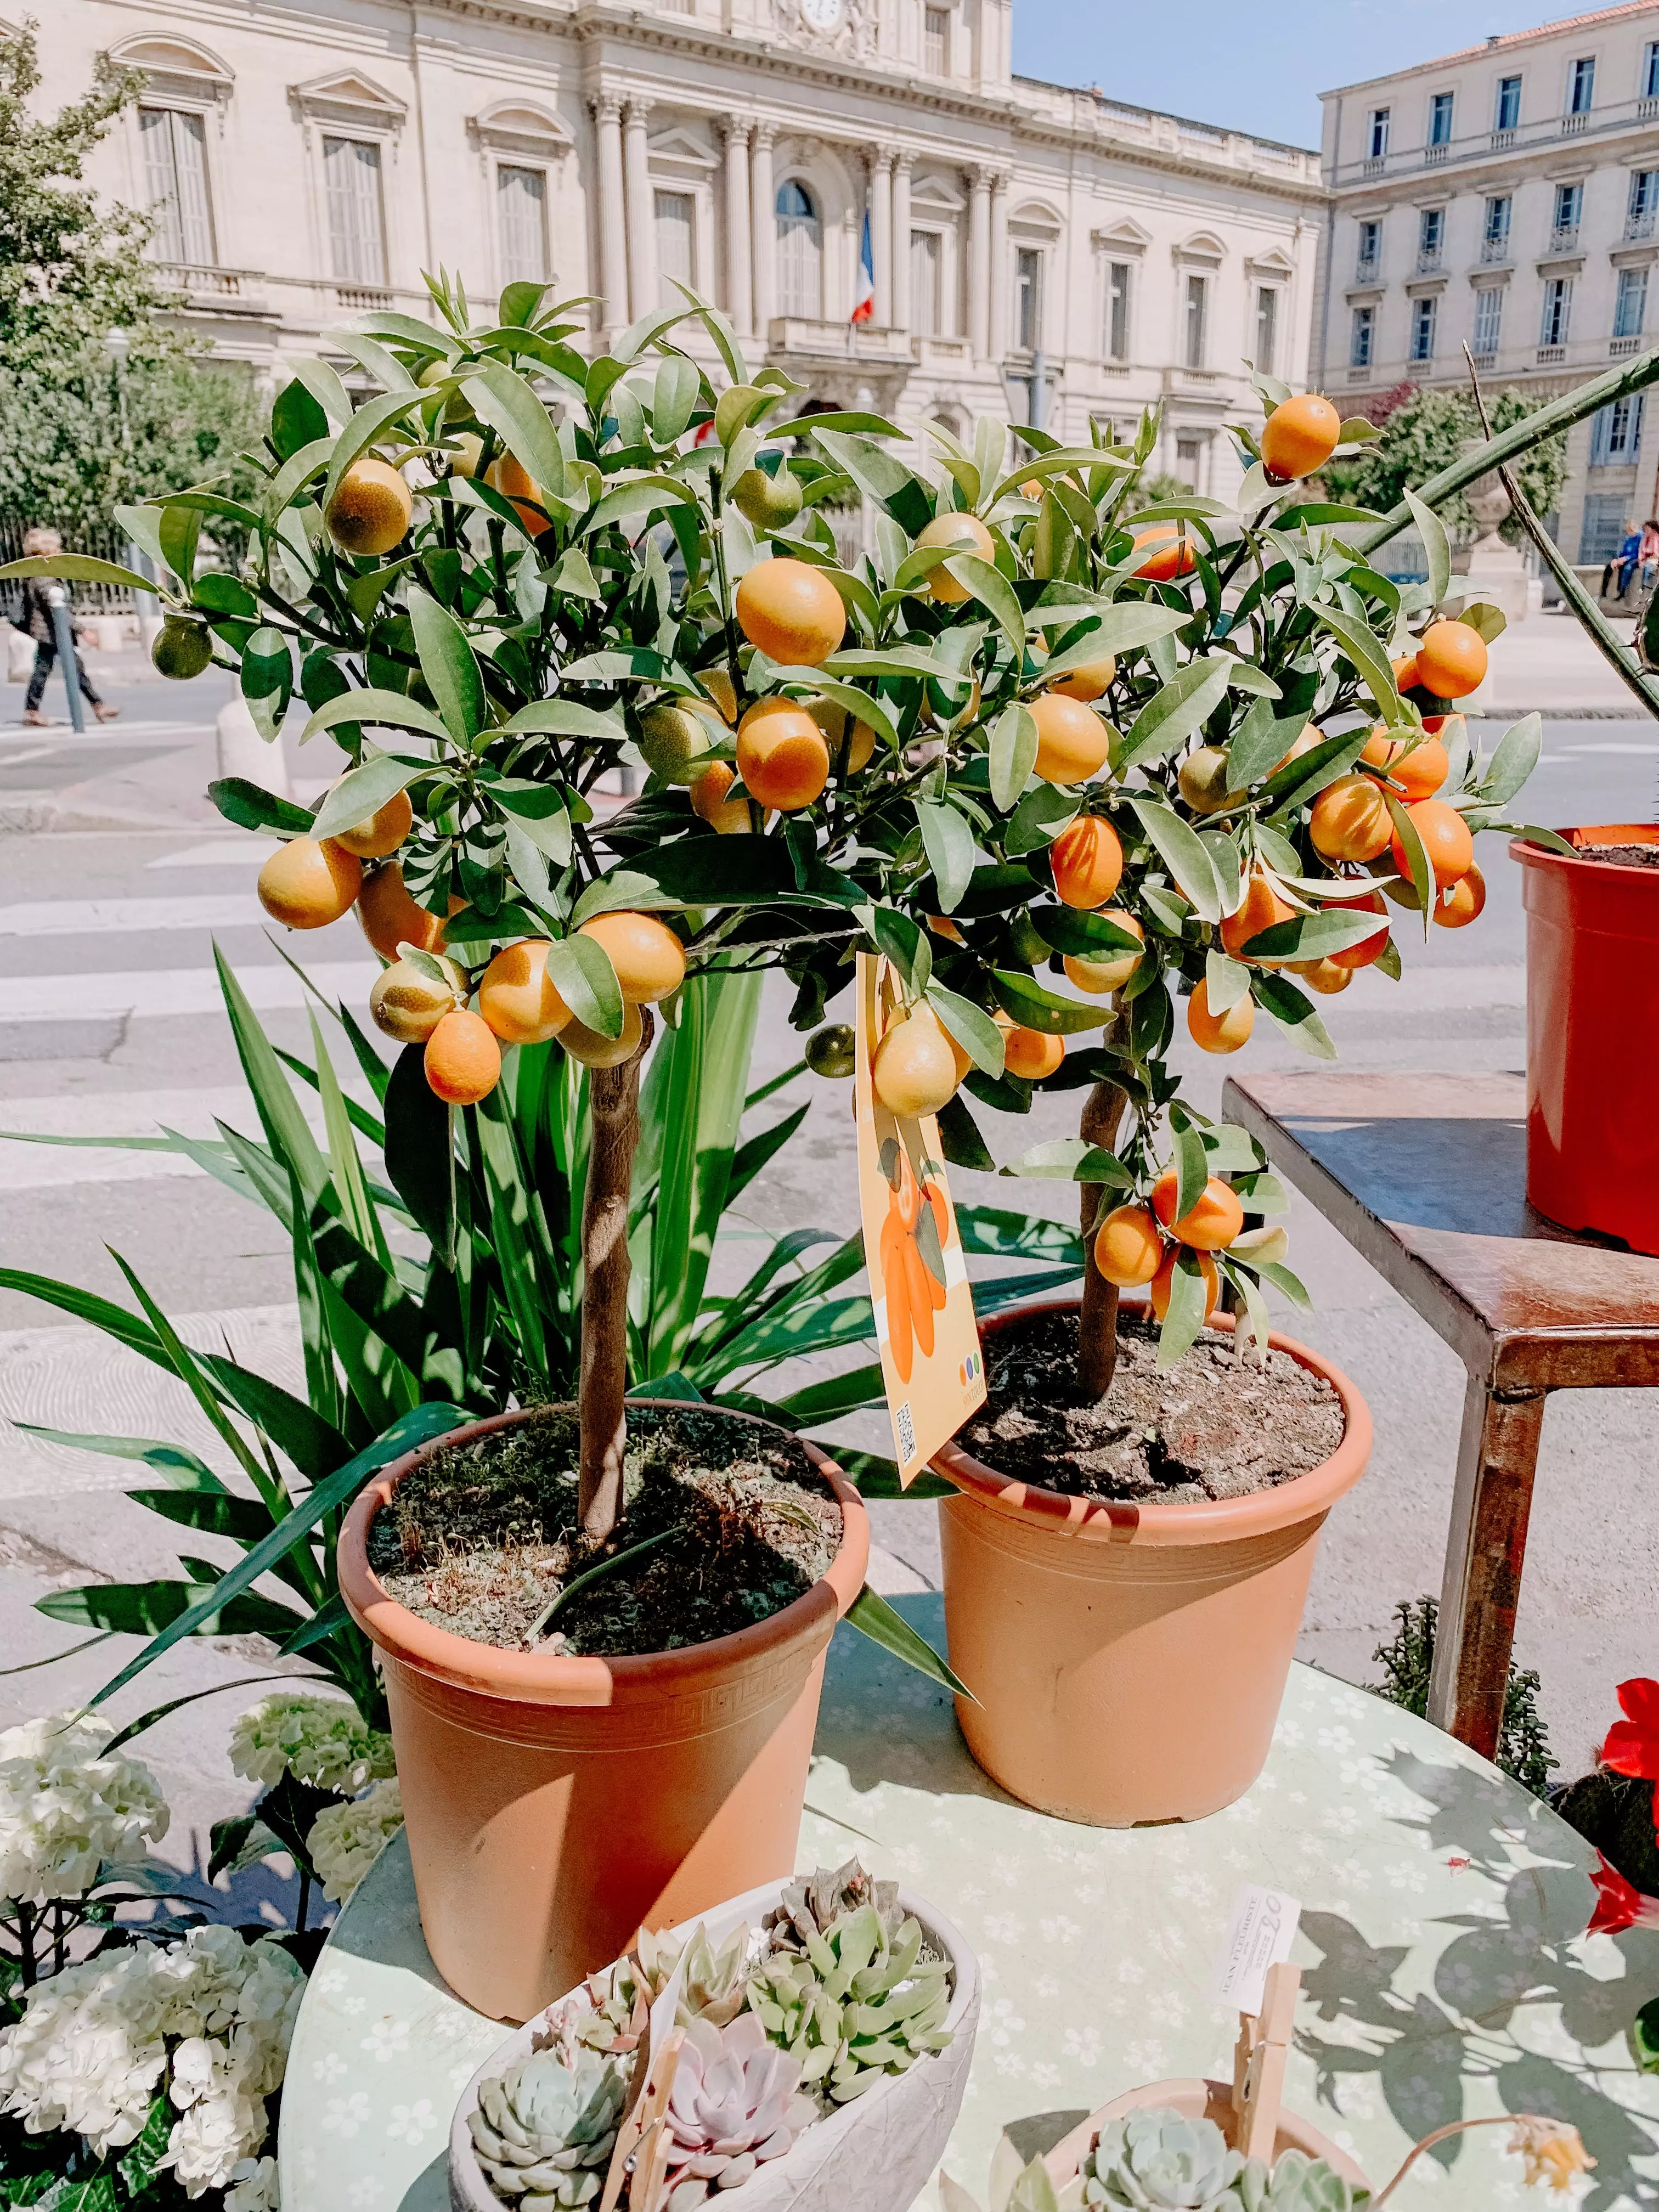 nagami kumquat for sale - buying & growing guide - trees